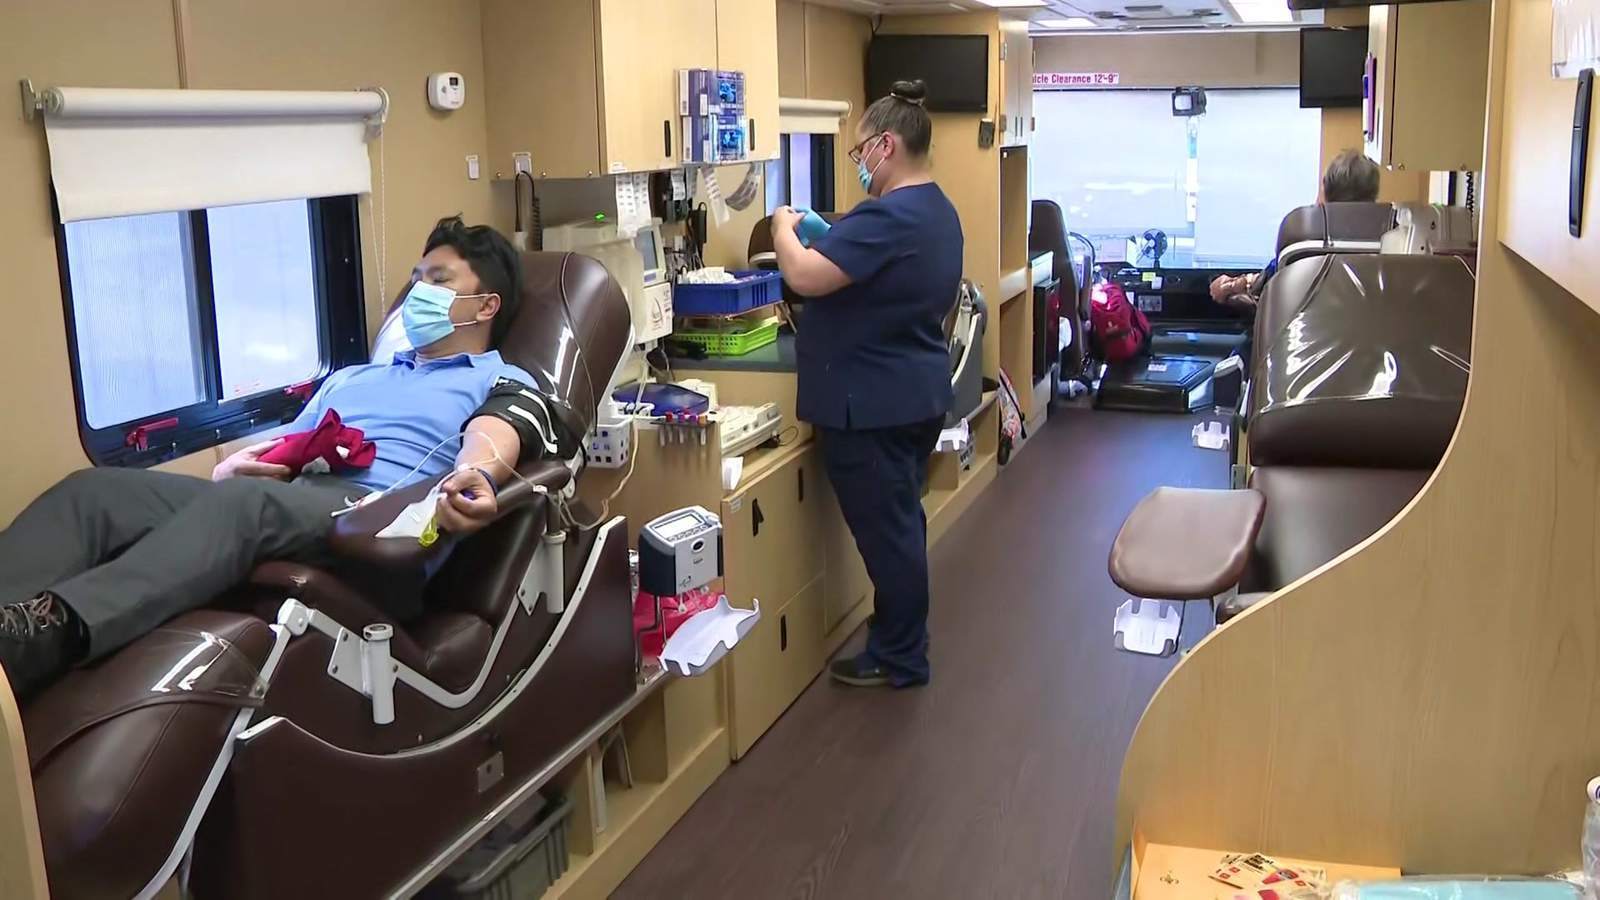 When you donate blood in the Houston area, they will now test for COVID-19 antibodies for free